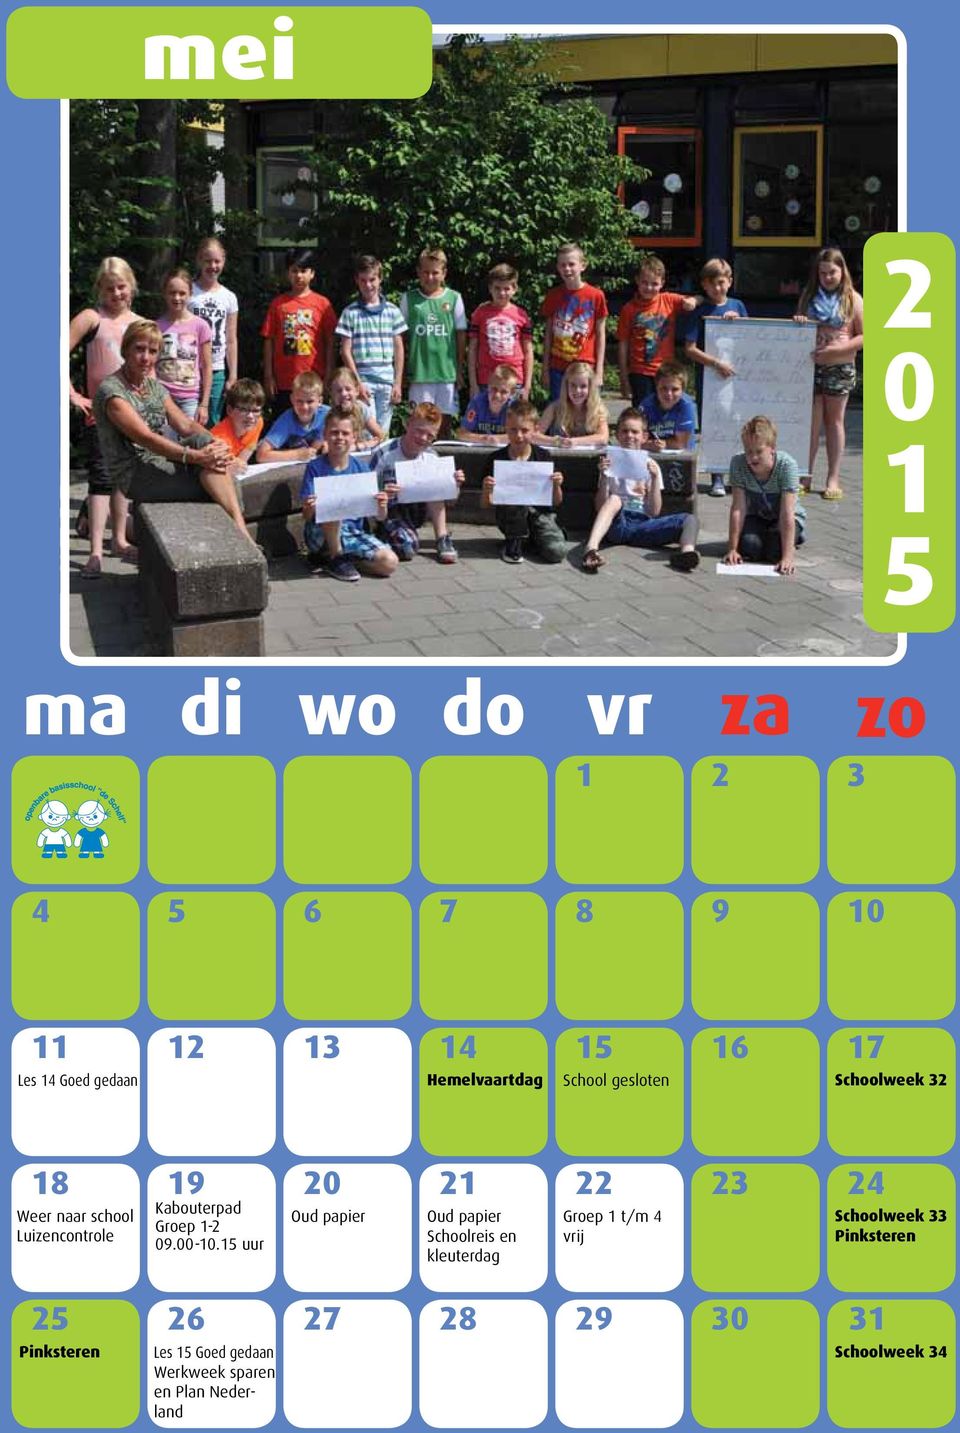 Kabouterpad Groep - 